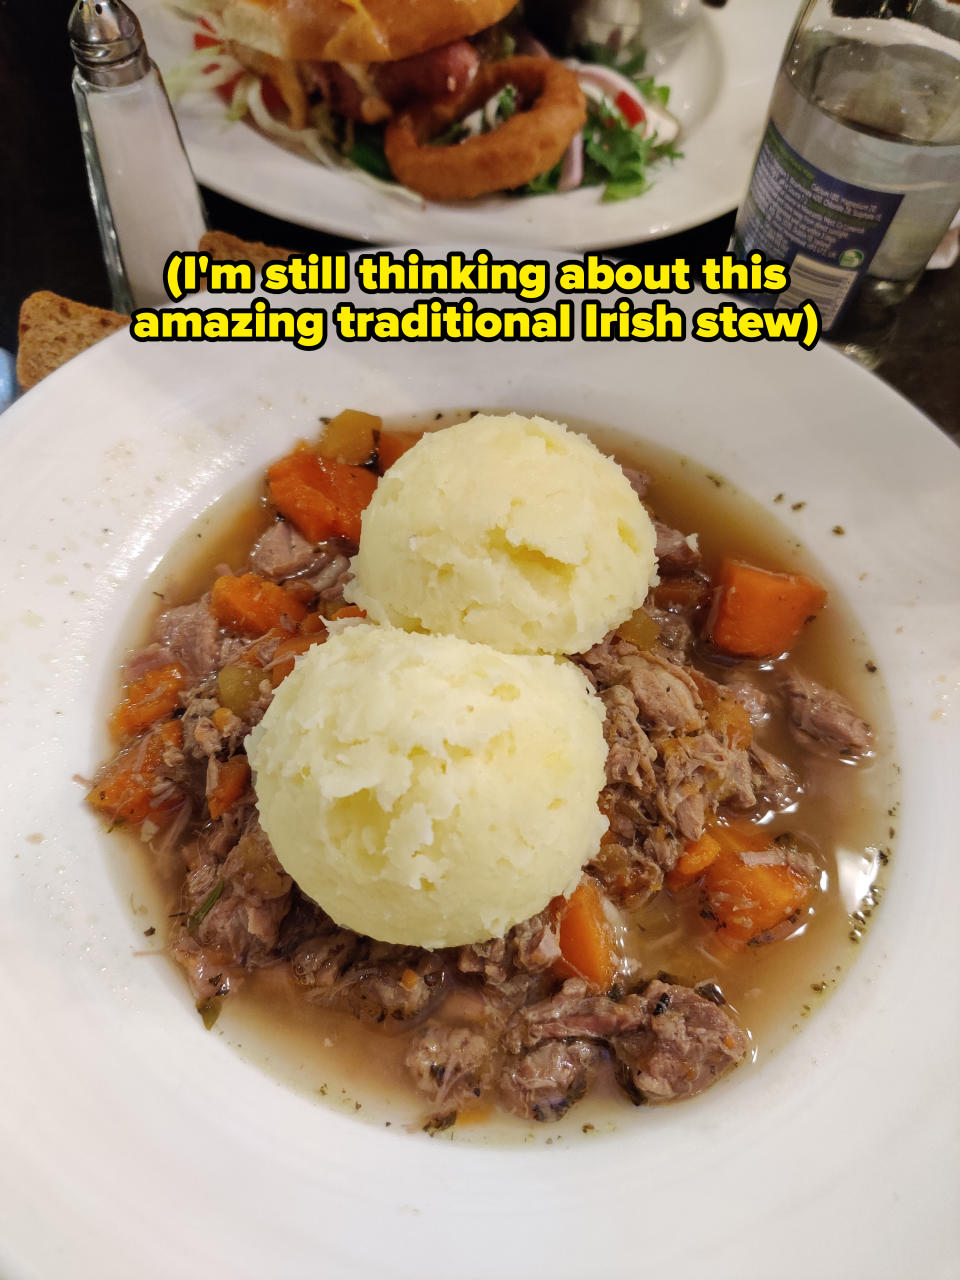 Plate of traditional Irish stew with mashed potatoes served on a table